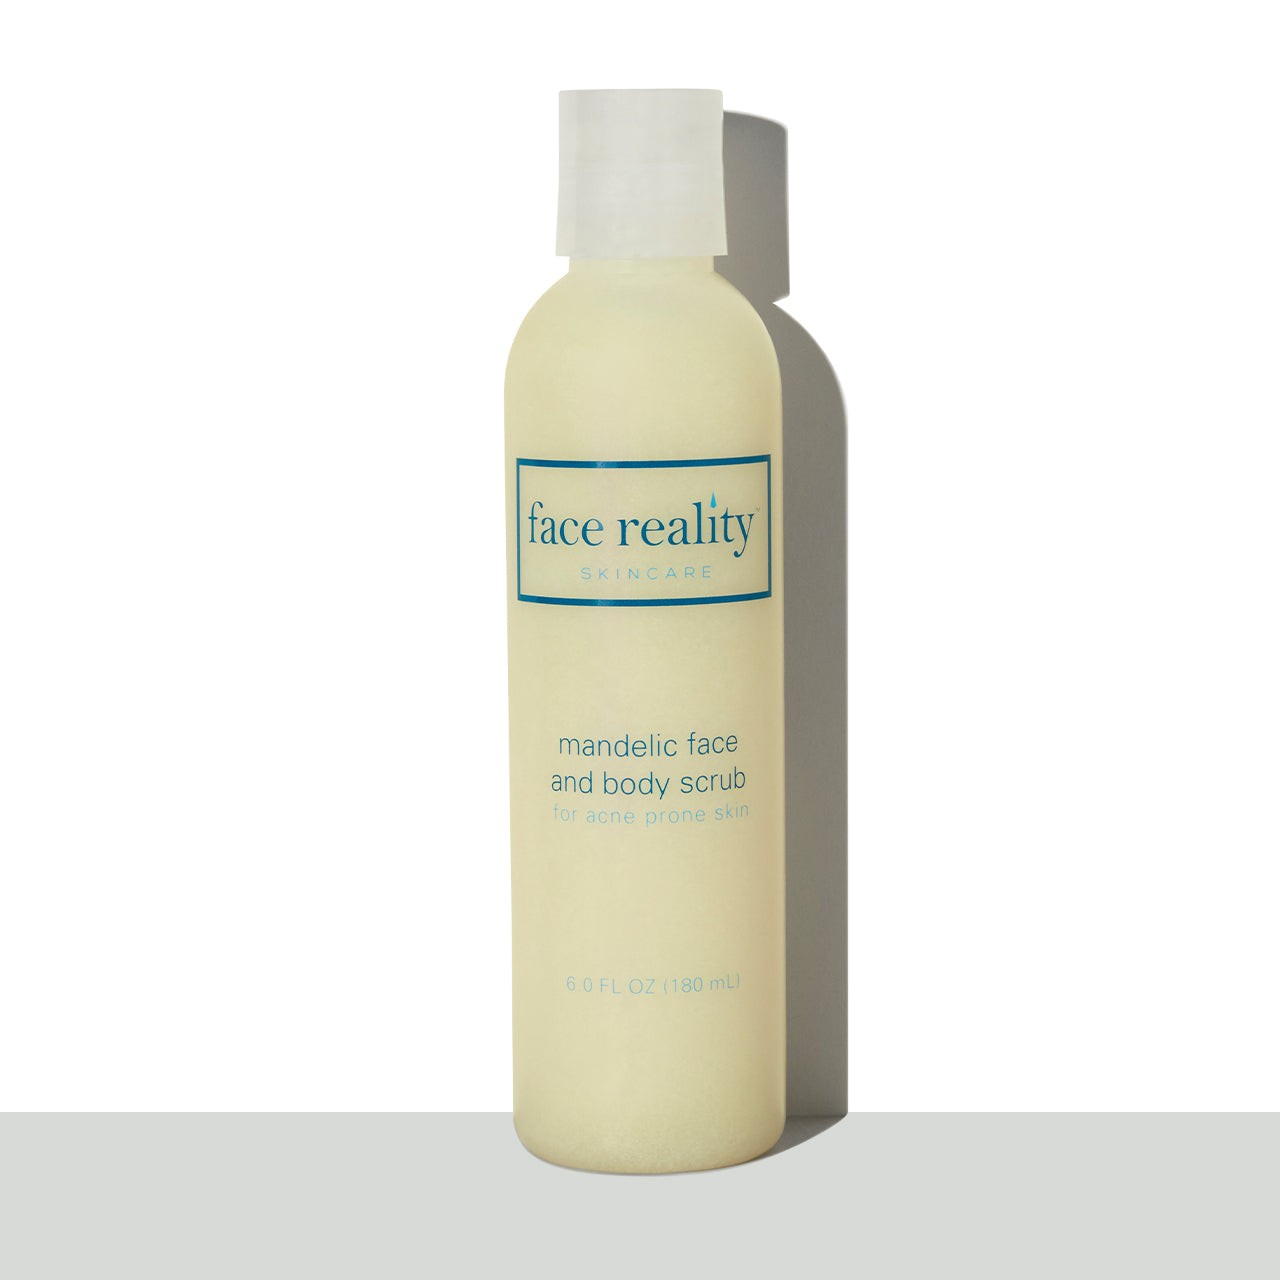 Clear six ounce bottle of Face Reality mandelic face and body scrub in front of a white background on a grey surface